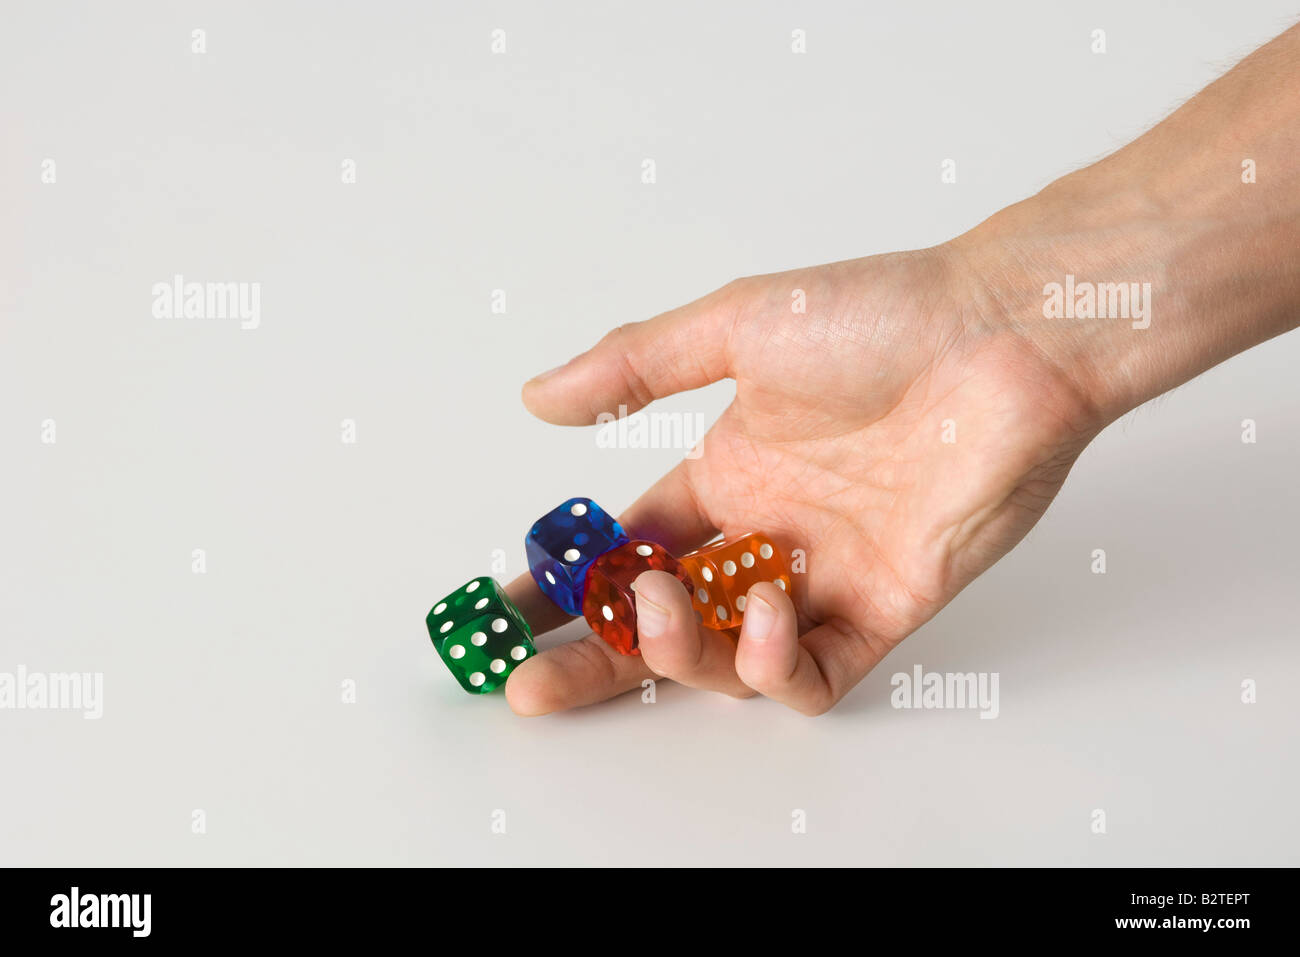 Hand rolling dice Stock Photo